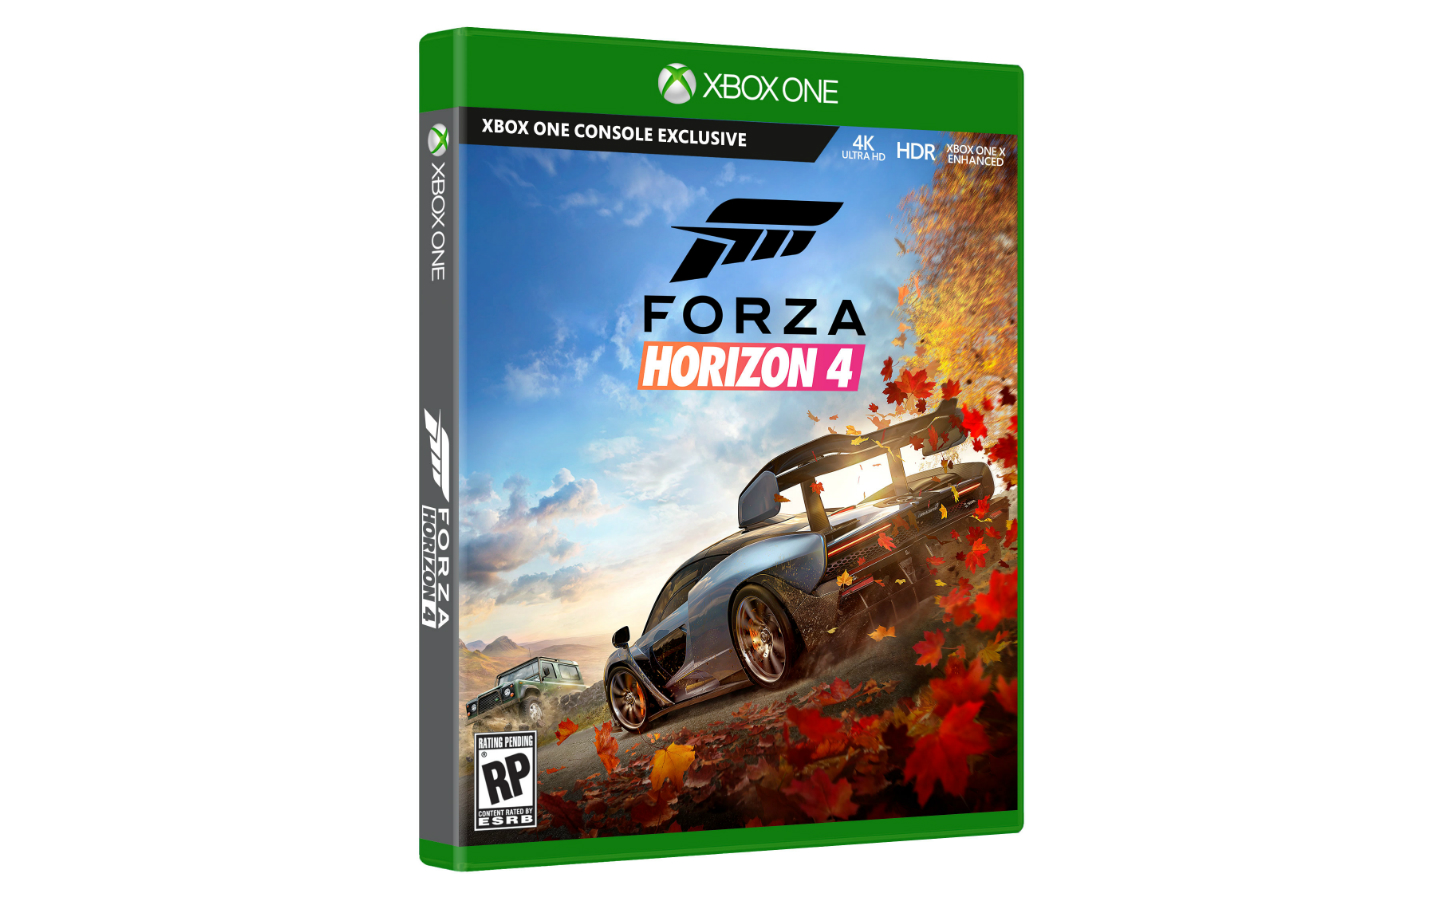 Christmas gift guide: Forza Horizon 4 racing game video games for XBox One